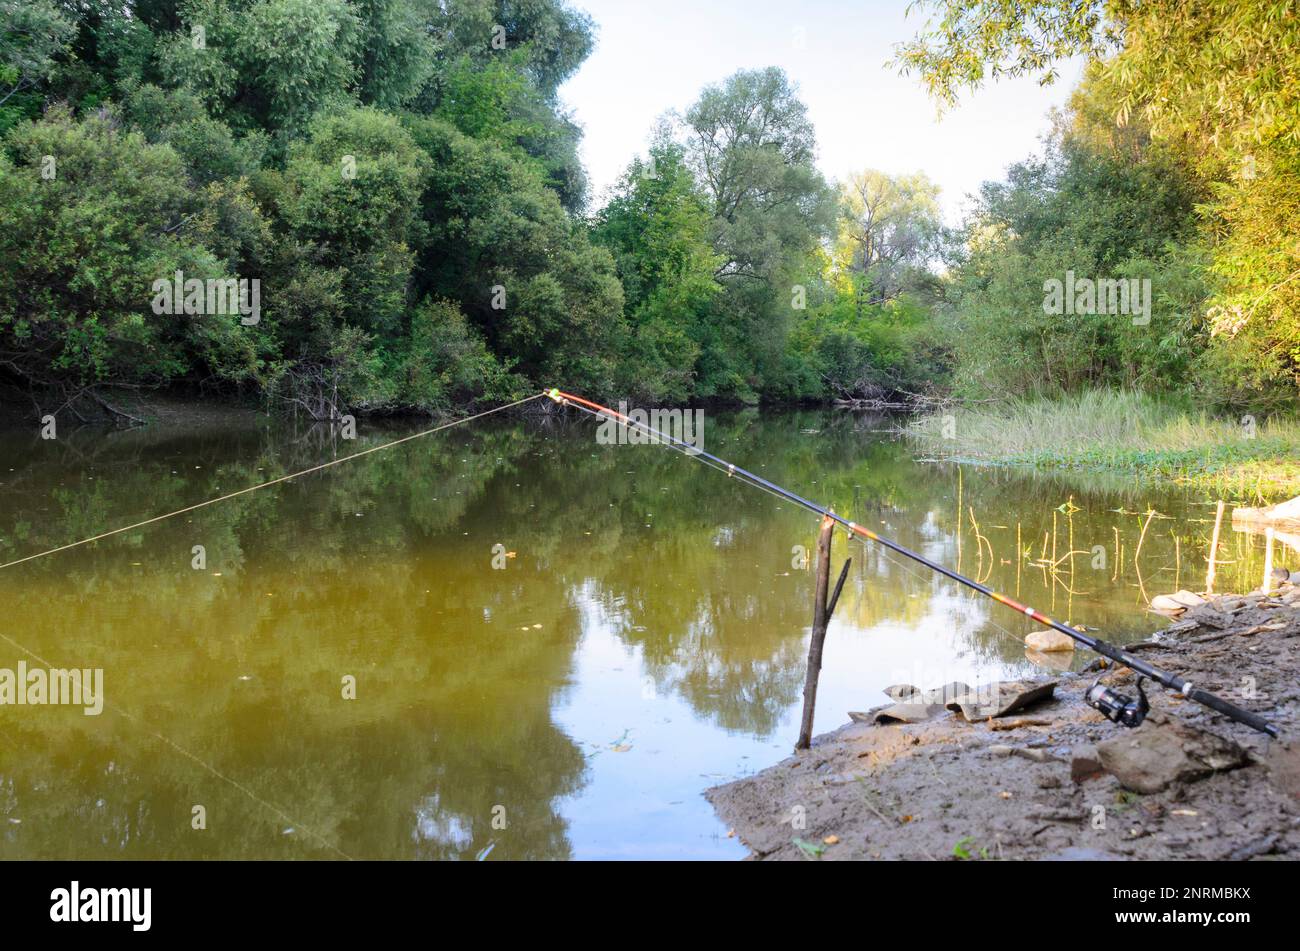 https://c8.alamy.com/comp/2NRMBKX/a-fishing-rod-stands-on-the-bank-of-a-small-river-in-the-summer-without-people-in-russia-2NRMBKX.jpg